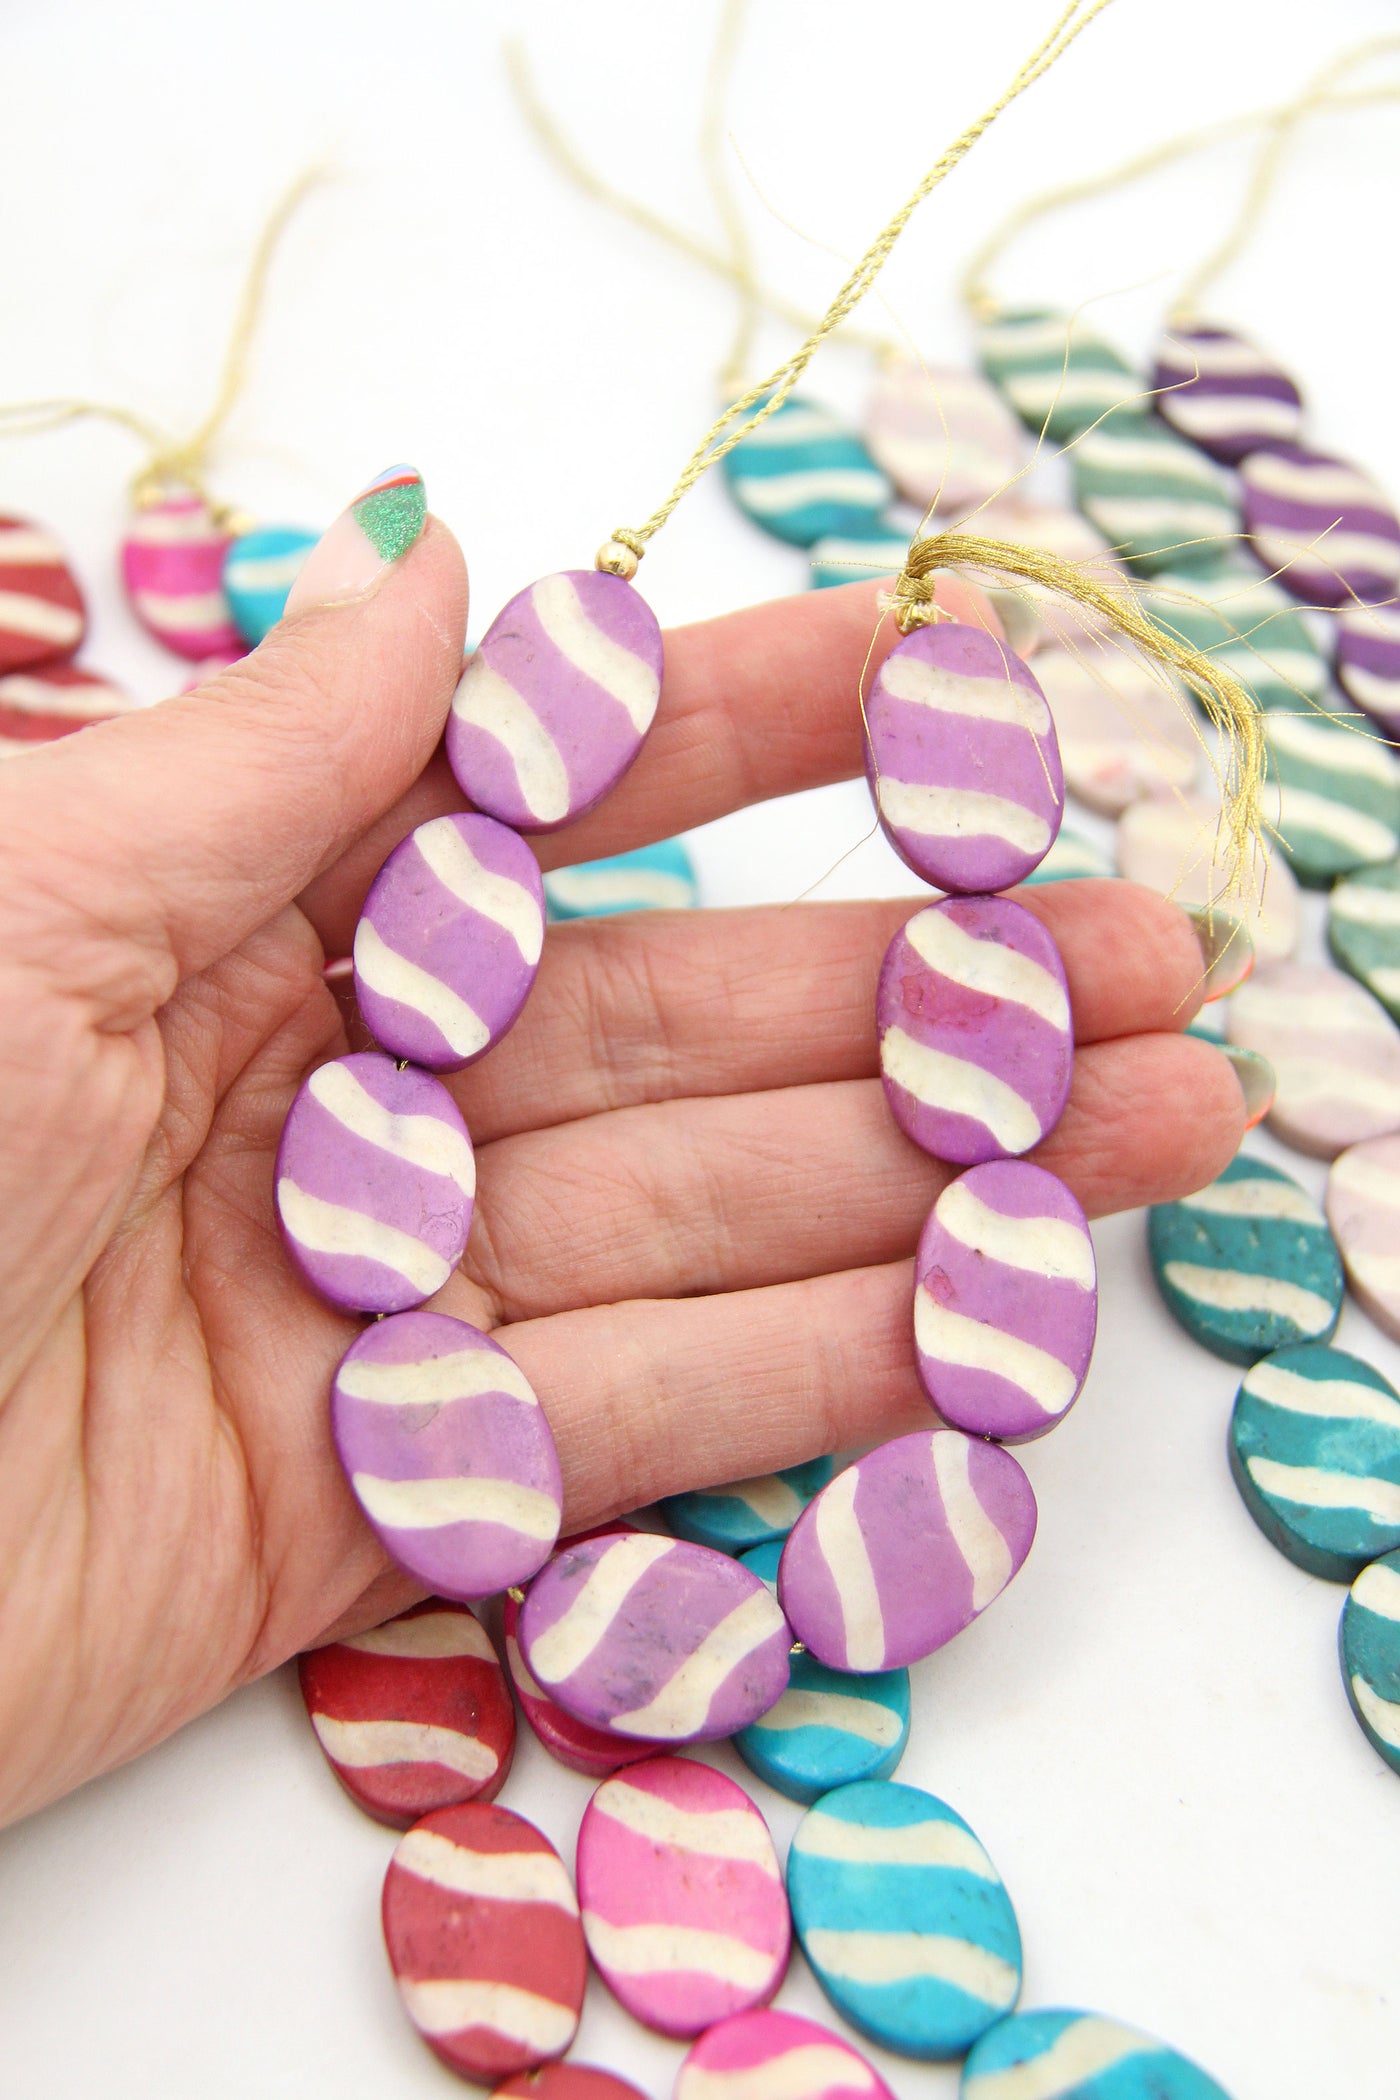 Reminiscent of Easter Eggs, these cute beads would make great accents in your Spring crafts